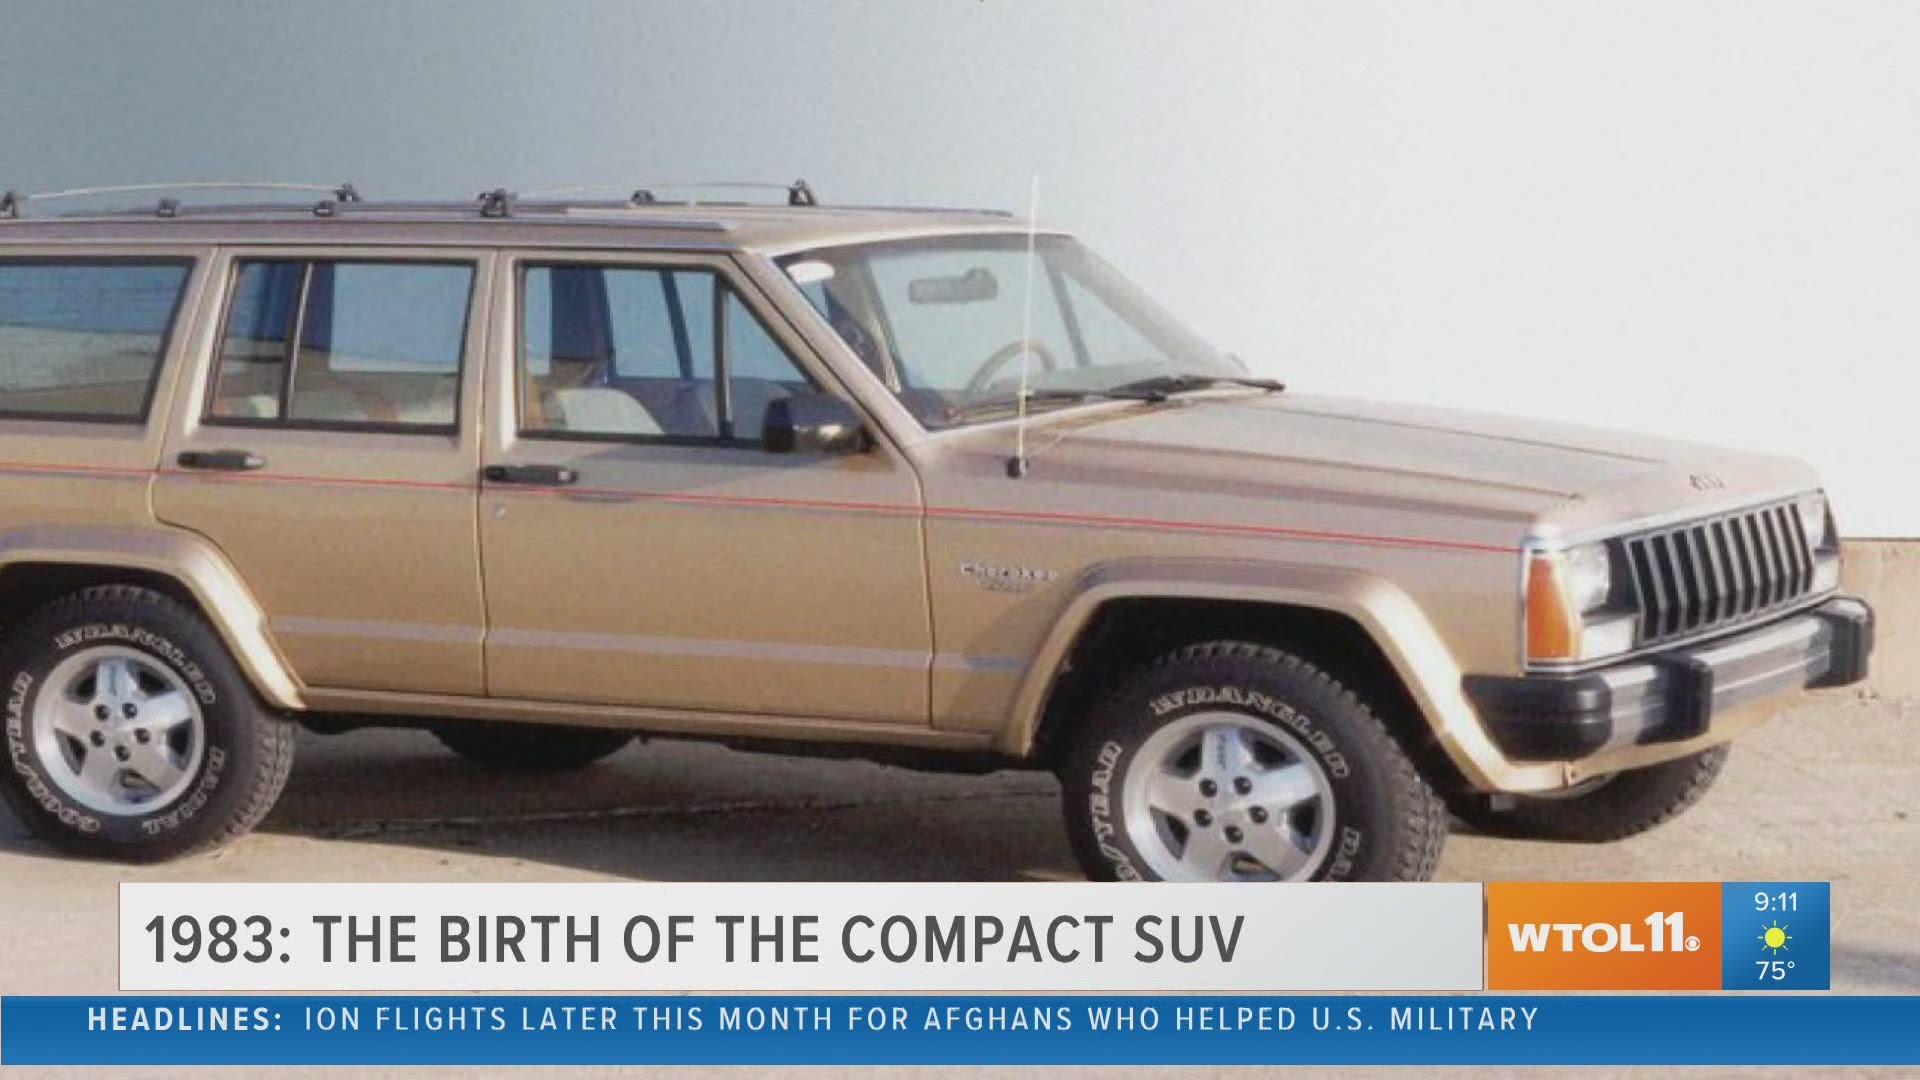 In 1983, the first XJ Jeep Cherokee rolls off assembly line at the Jeep Parkway plant.